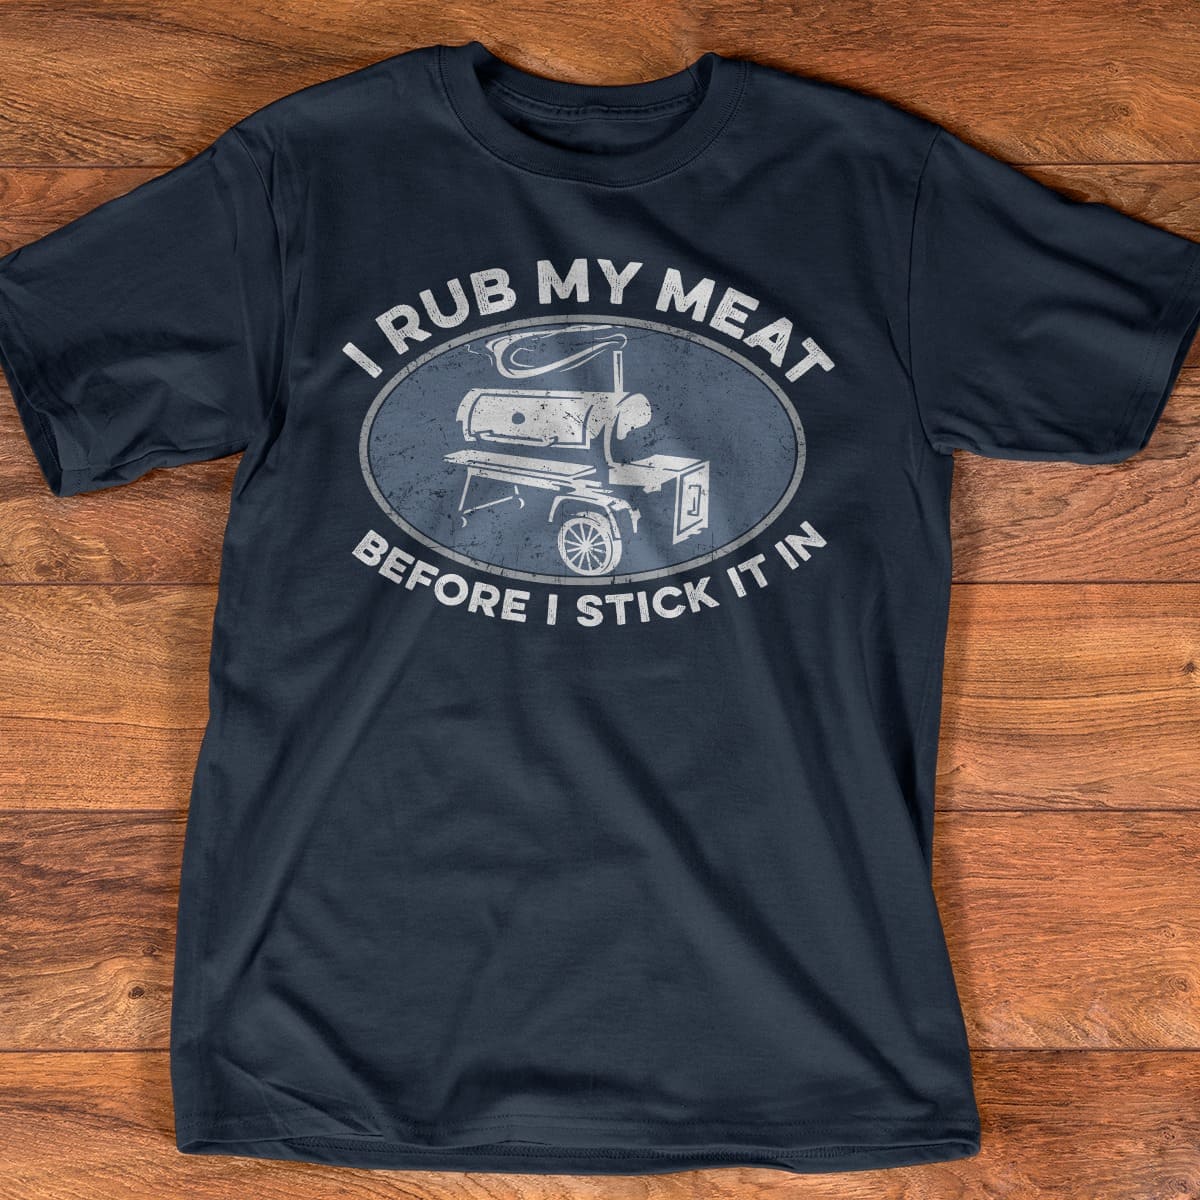 I rub my meat before I stick it in - Smoker graphic T-shirt, love grilling meat